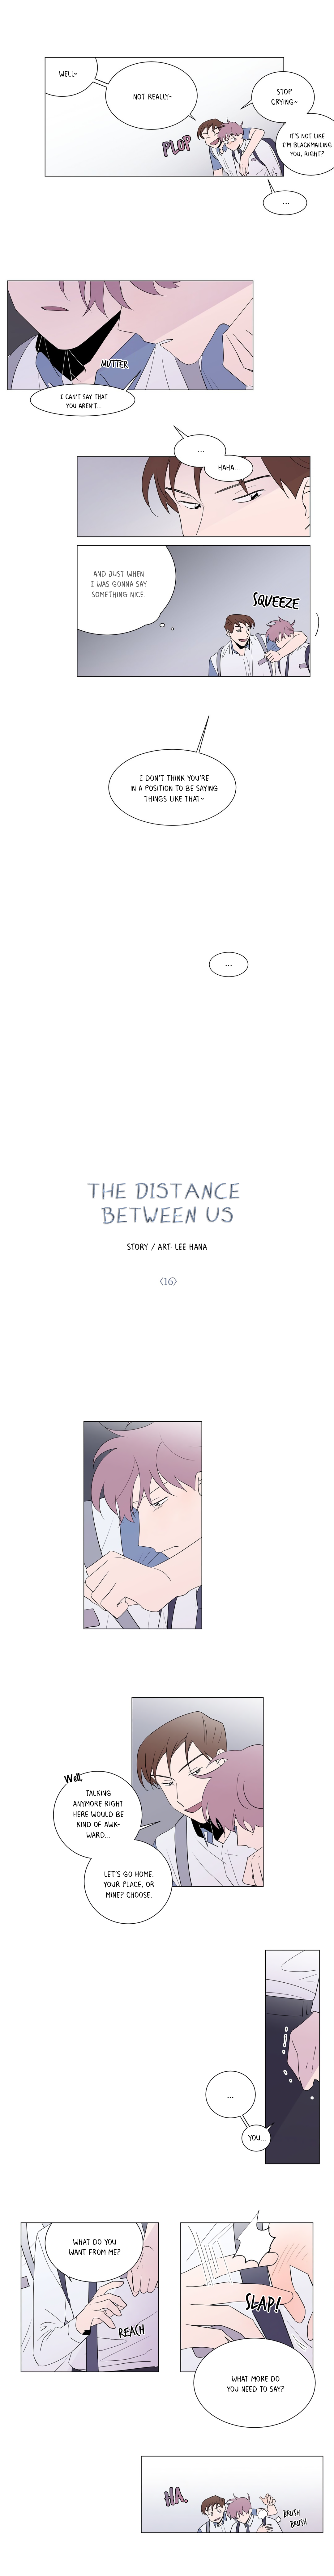 Distance Between Us - Page 1